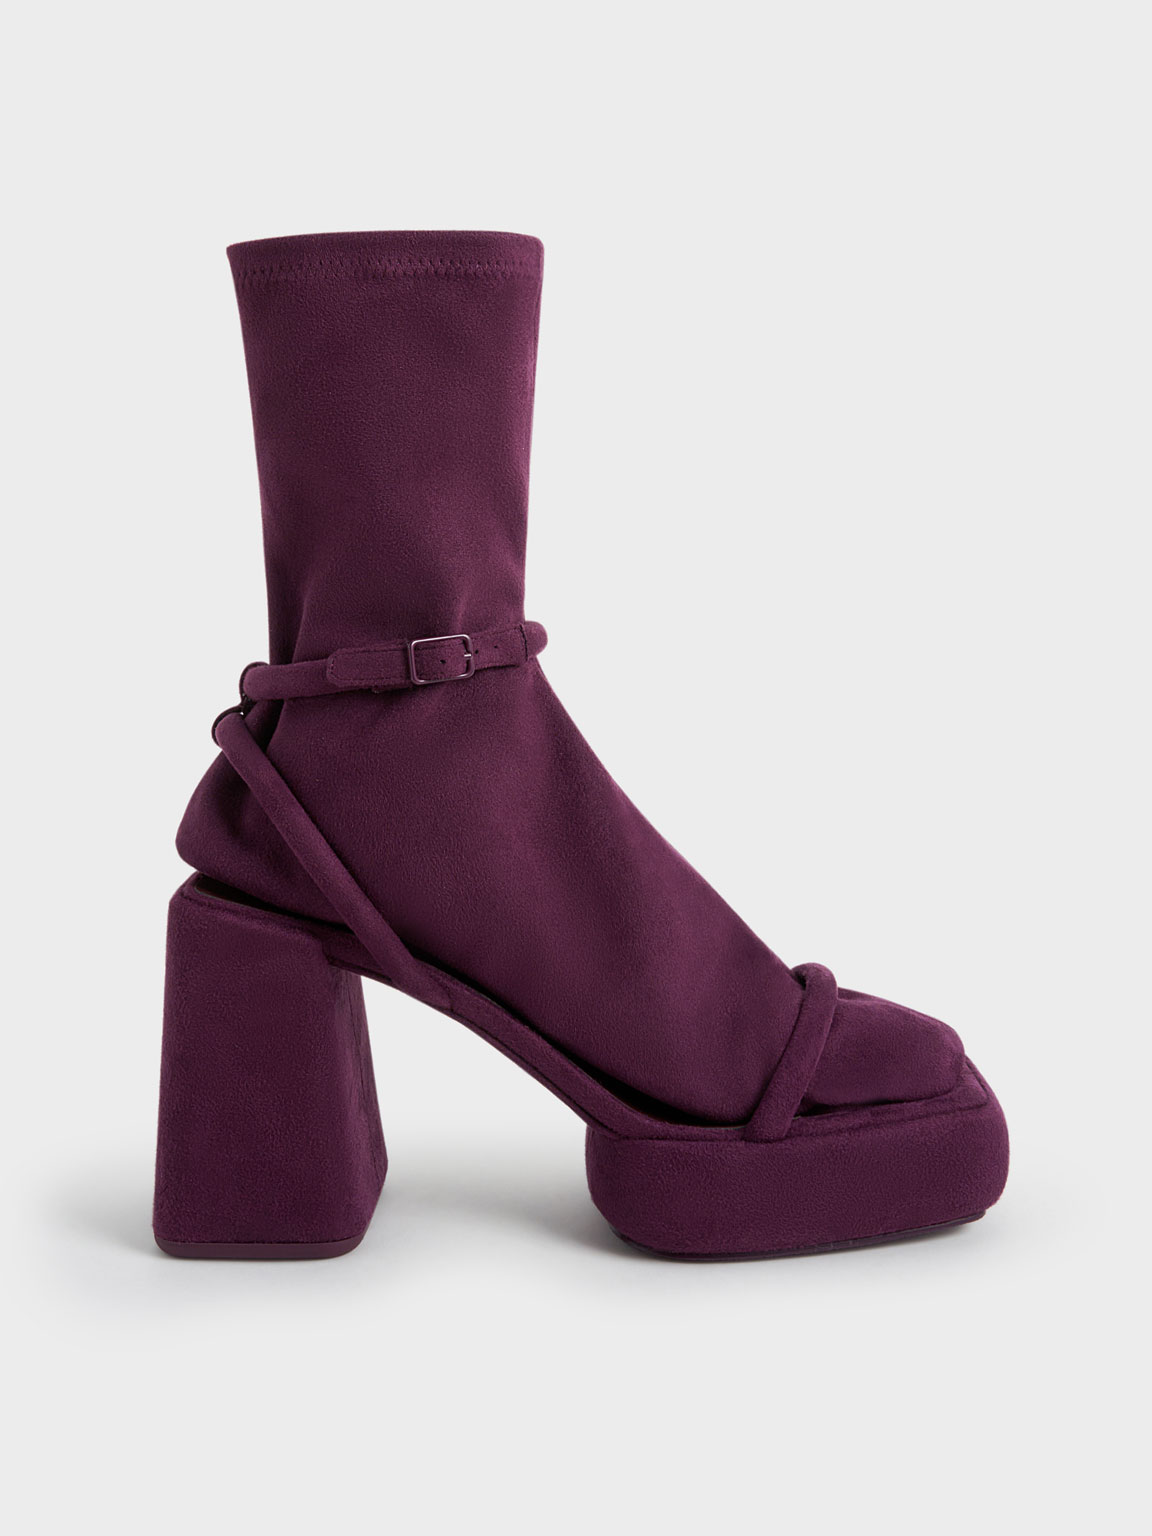 Charles & Keith Lucile Textured Platform Calf Boots In Burgundy